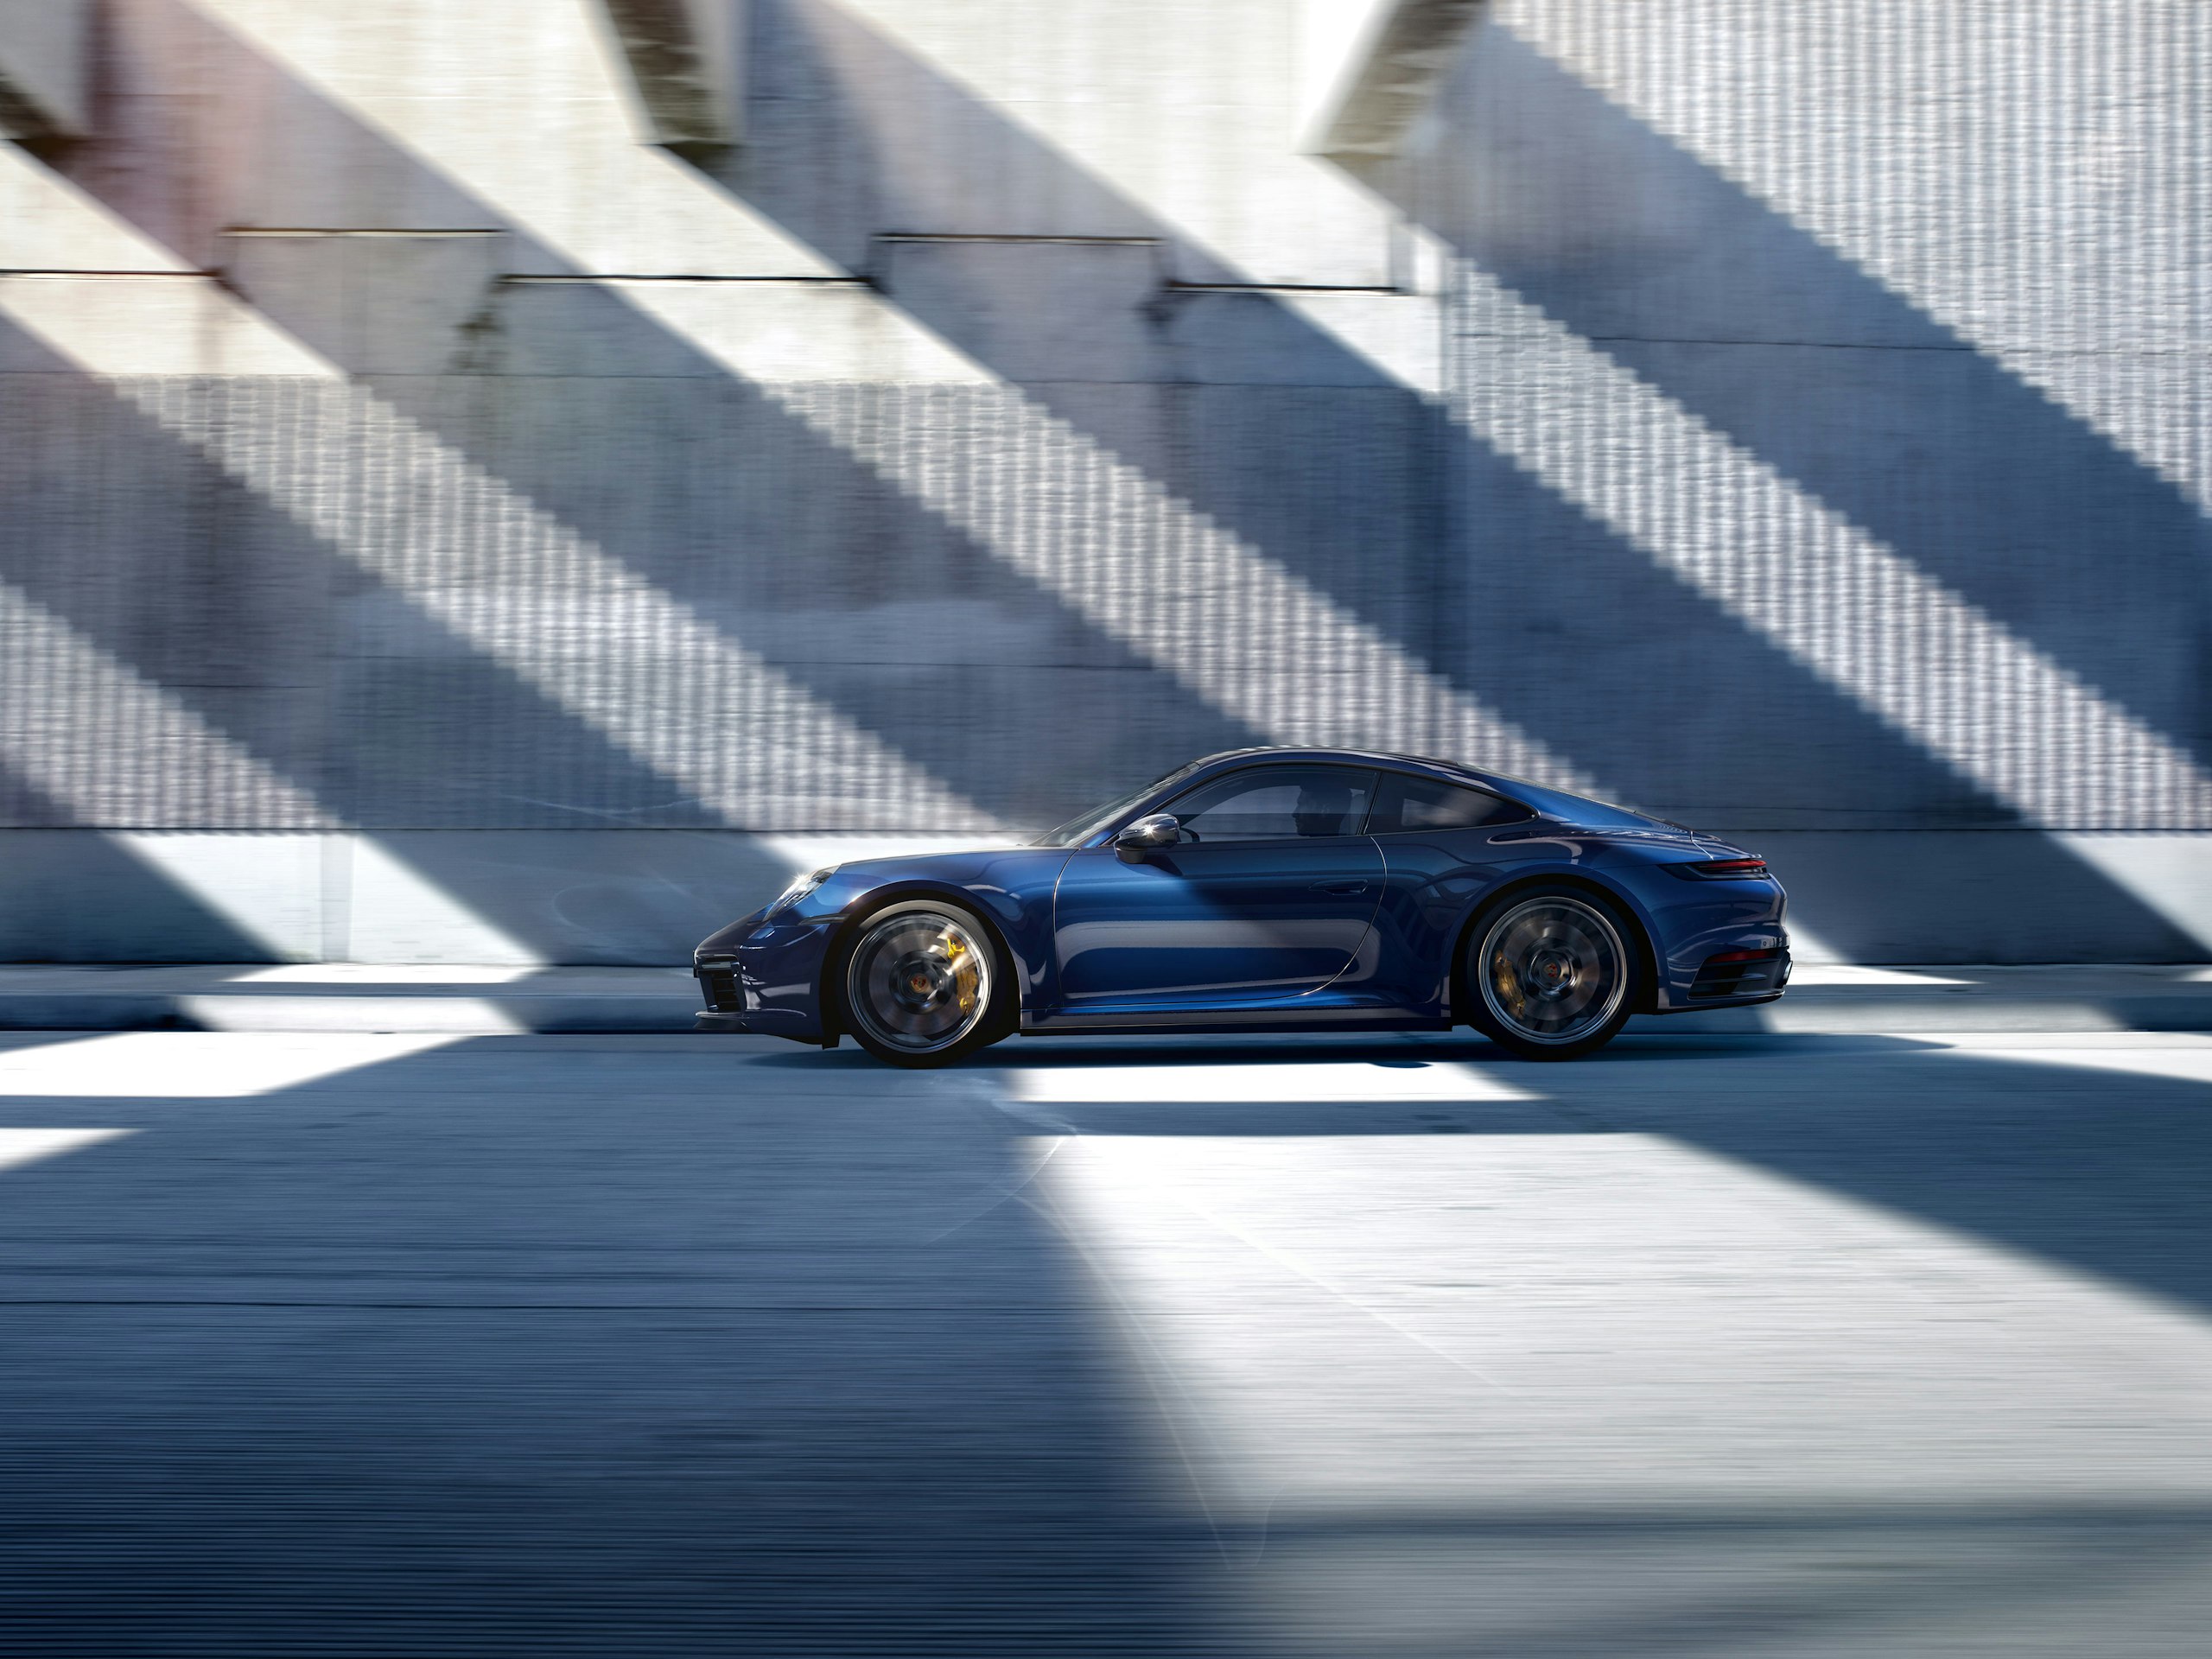 Side shot of a dark blue 911 Carrera 4S driving past a gray house facade